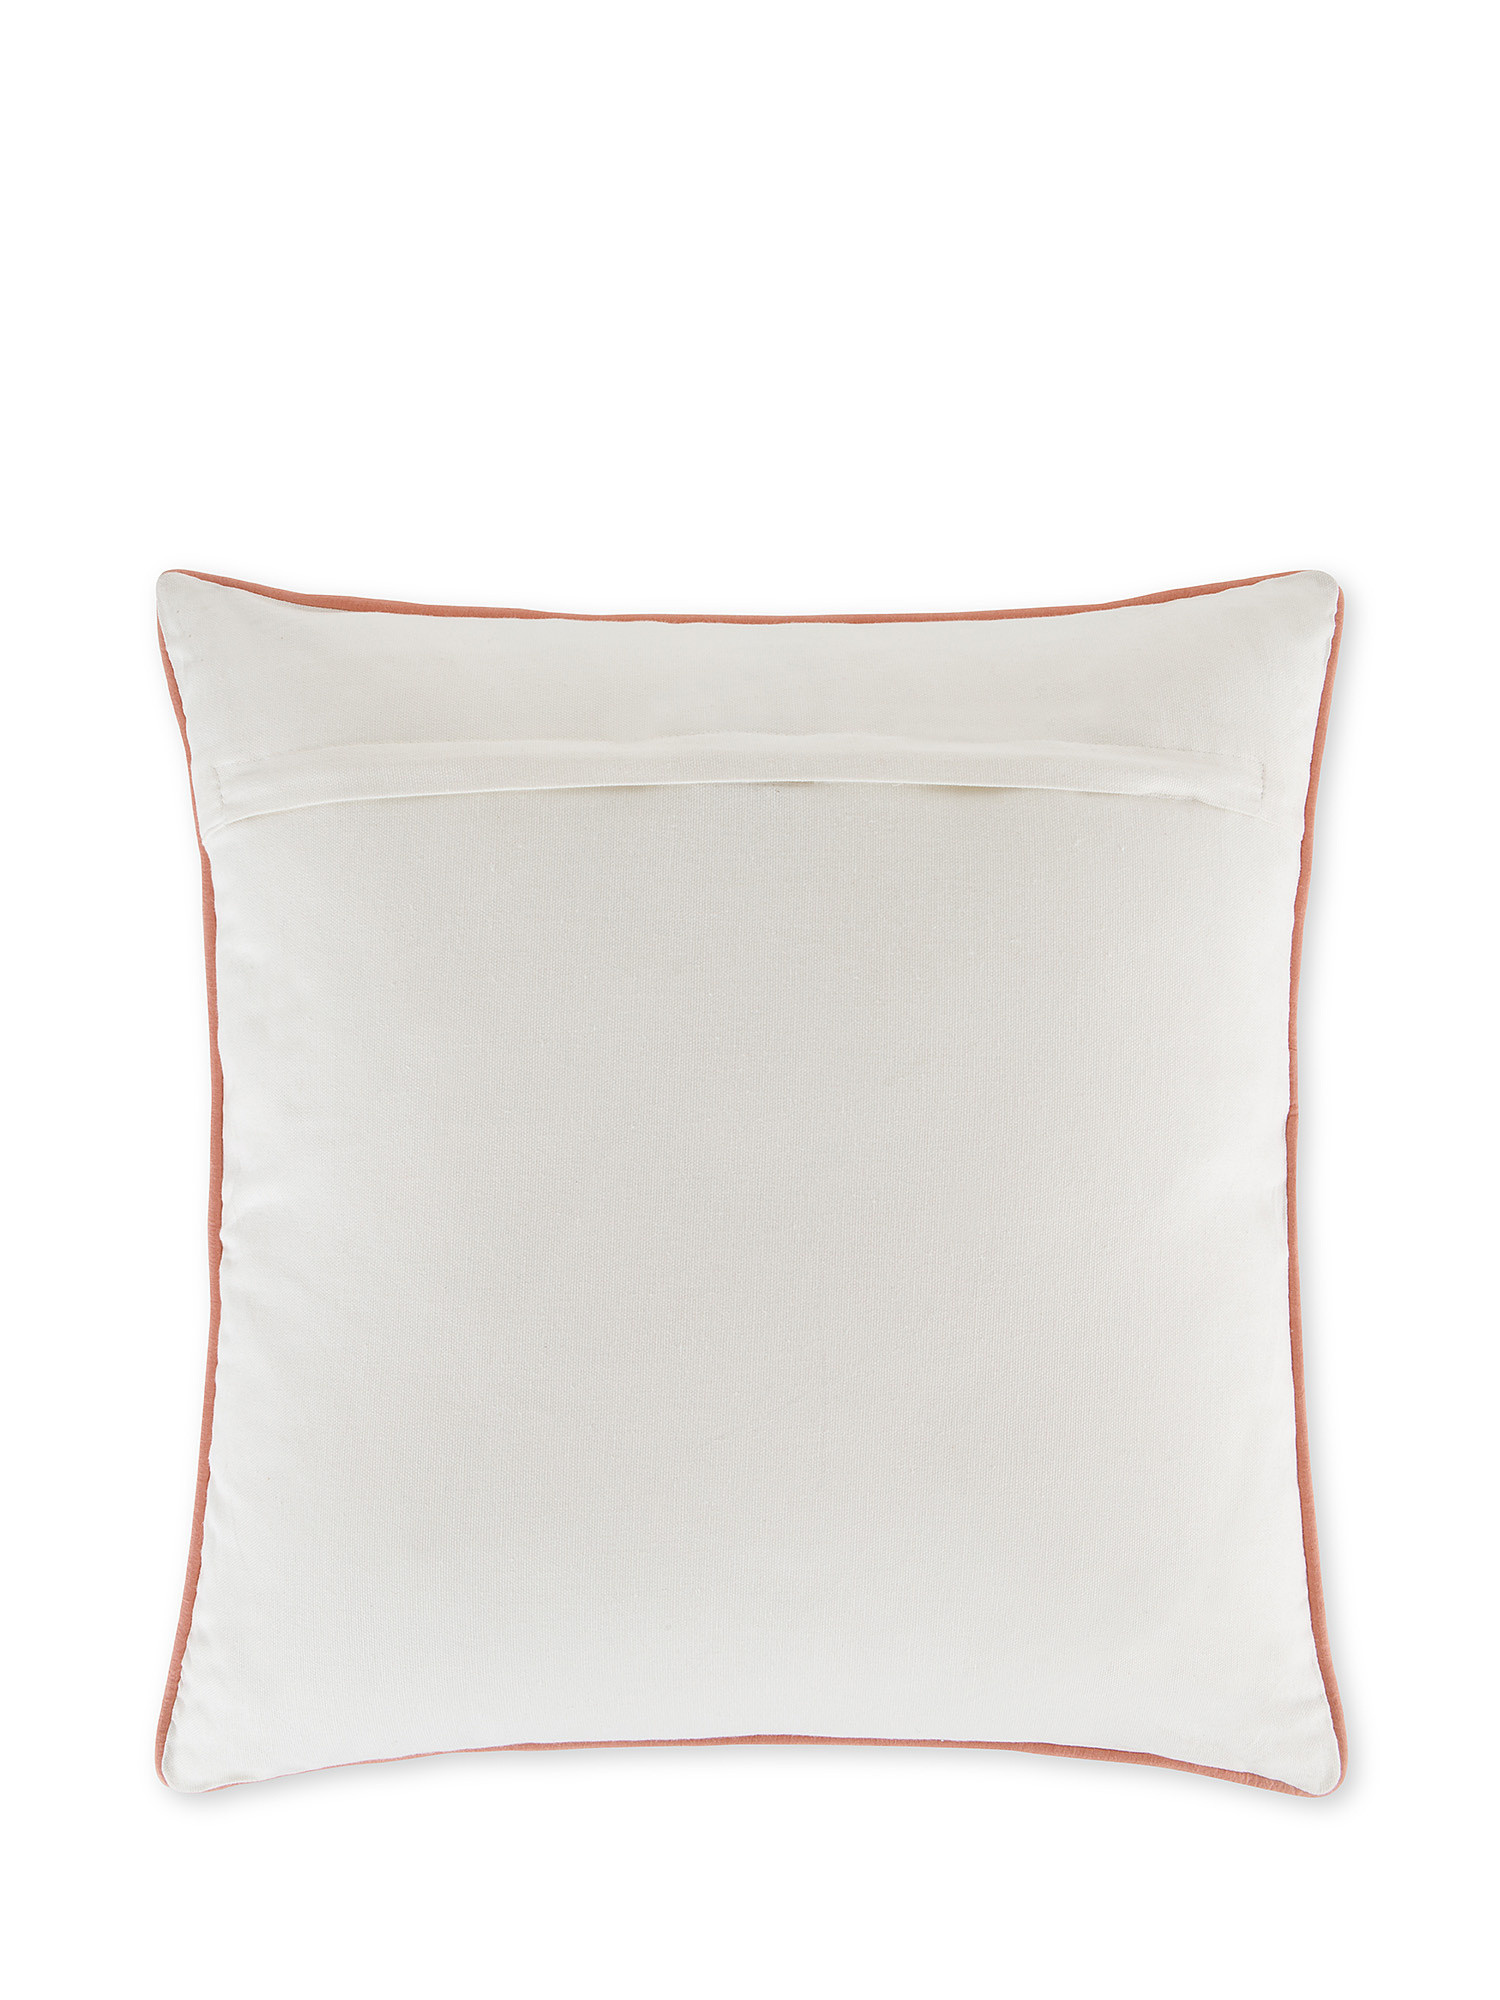 Coral embroidery cushion 45x45cm, White, large image number 1